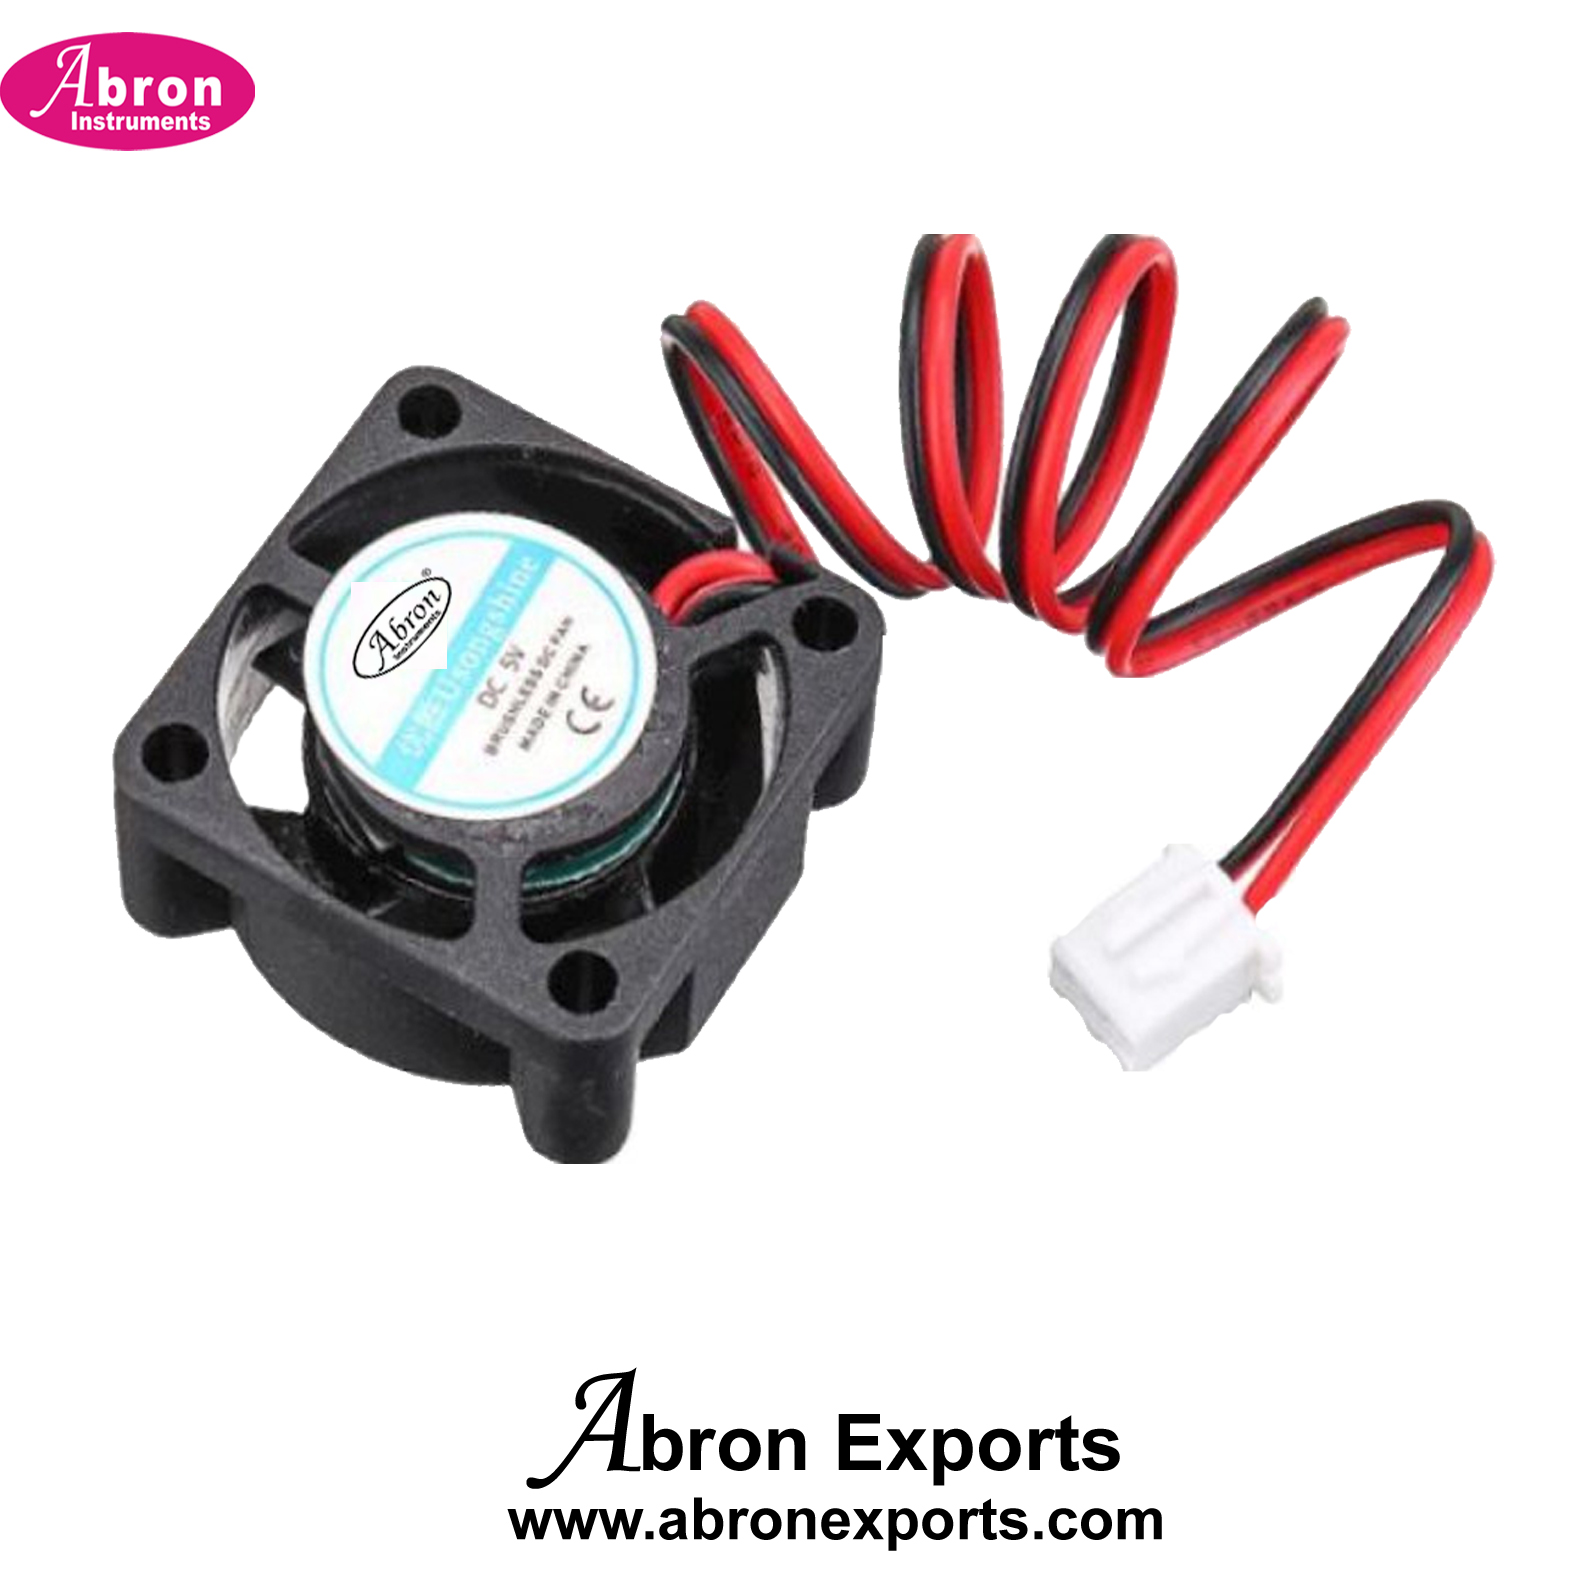 Electronic Spare Fan DC 5v Cooling Fan 25x25x10mm Size Abron AE-1224FB24 